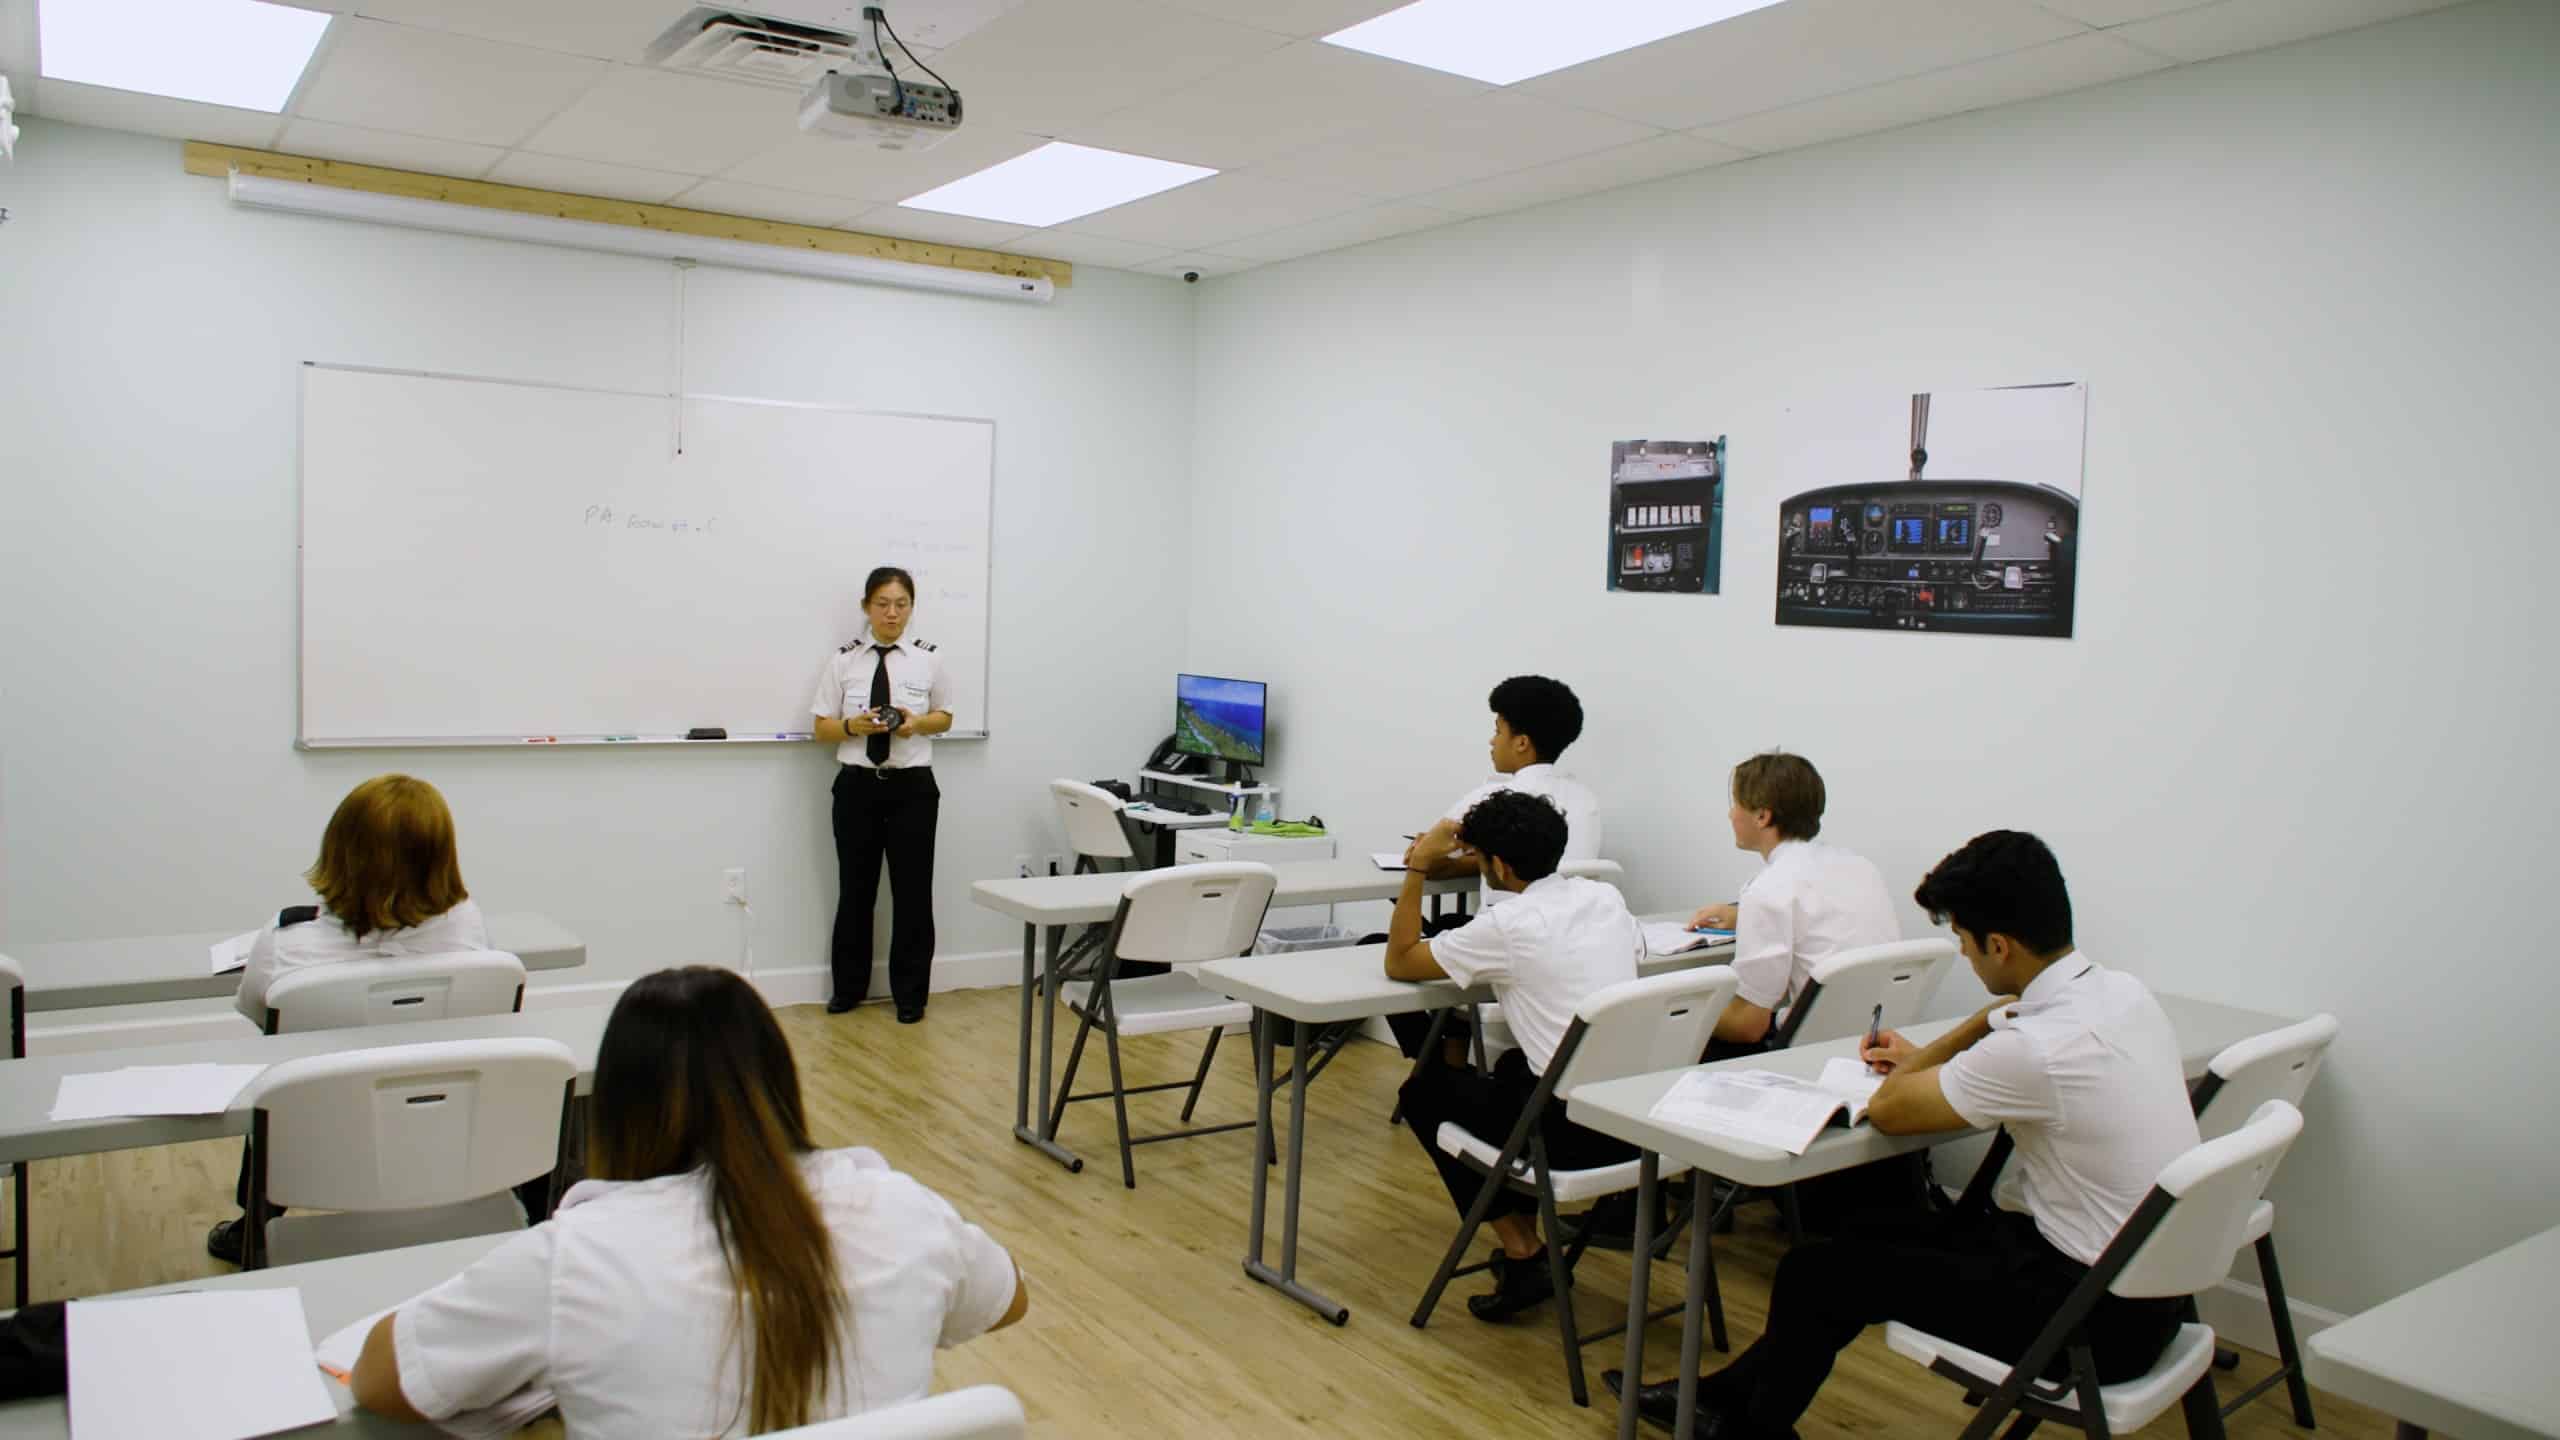 A Paris Air instructor standing in front of a classroom while students watch from their desks